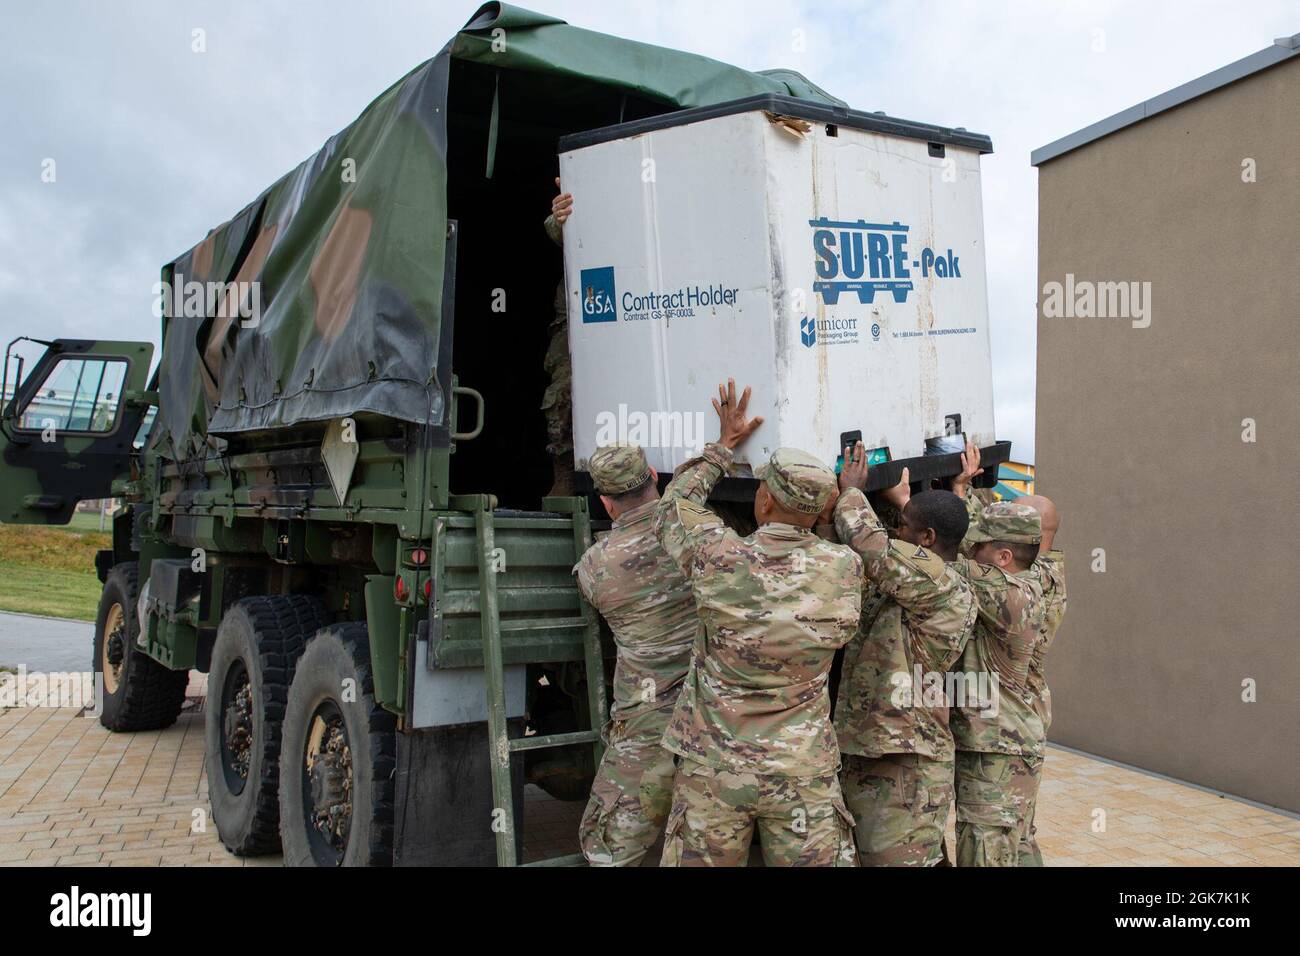 7th Army Training Command Soldiers load donations onto a light medium tactical vehicle for transport to Ramstein Air Base in southwestern Germany Aug. 27, 2021, in Netzaberg, Germany. The donations will support Operation Allies Refuge, an ongoing United States military operation to airlift selected at-risk Afghan civilians, particularly interpreters, U.S. Embassy employees, and other prospective Special Immigrant Visa (SIV) applicants, from Afghanistan. Stock Photo